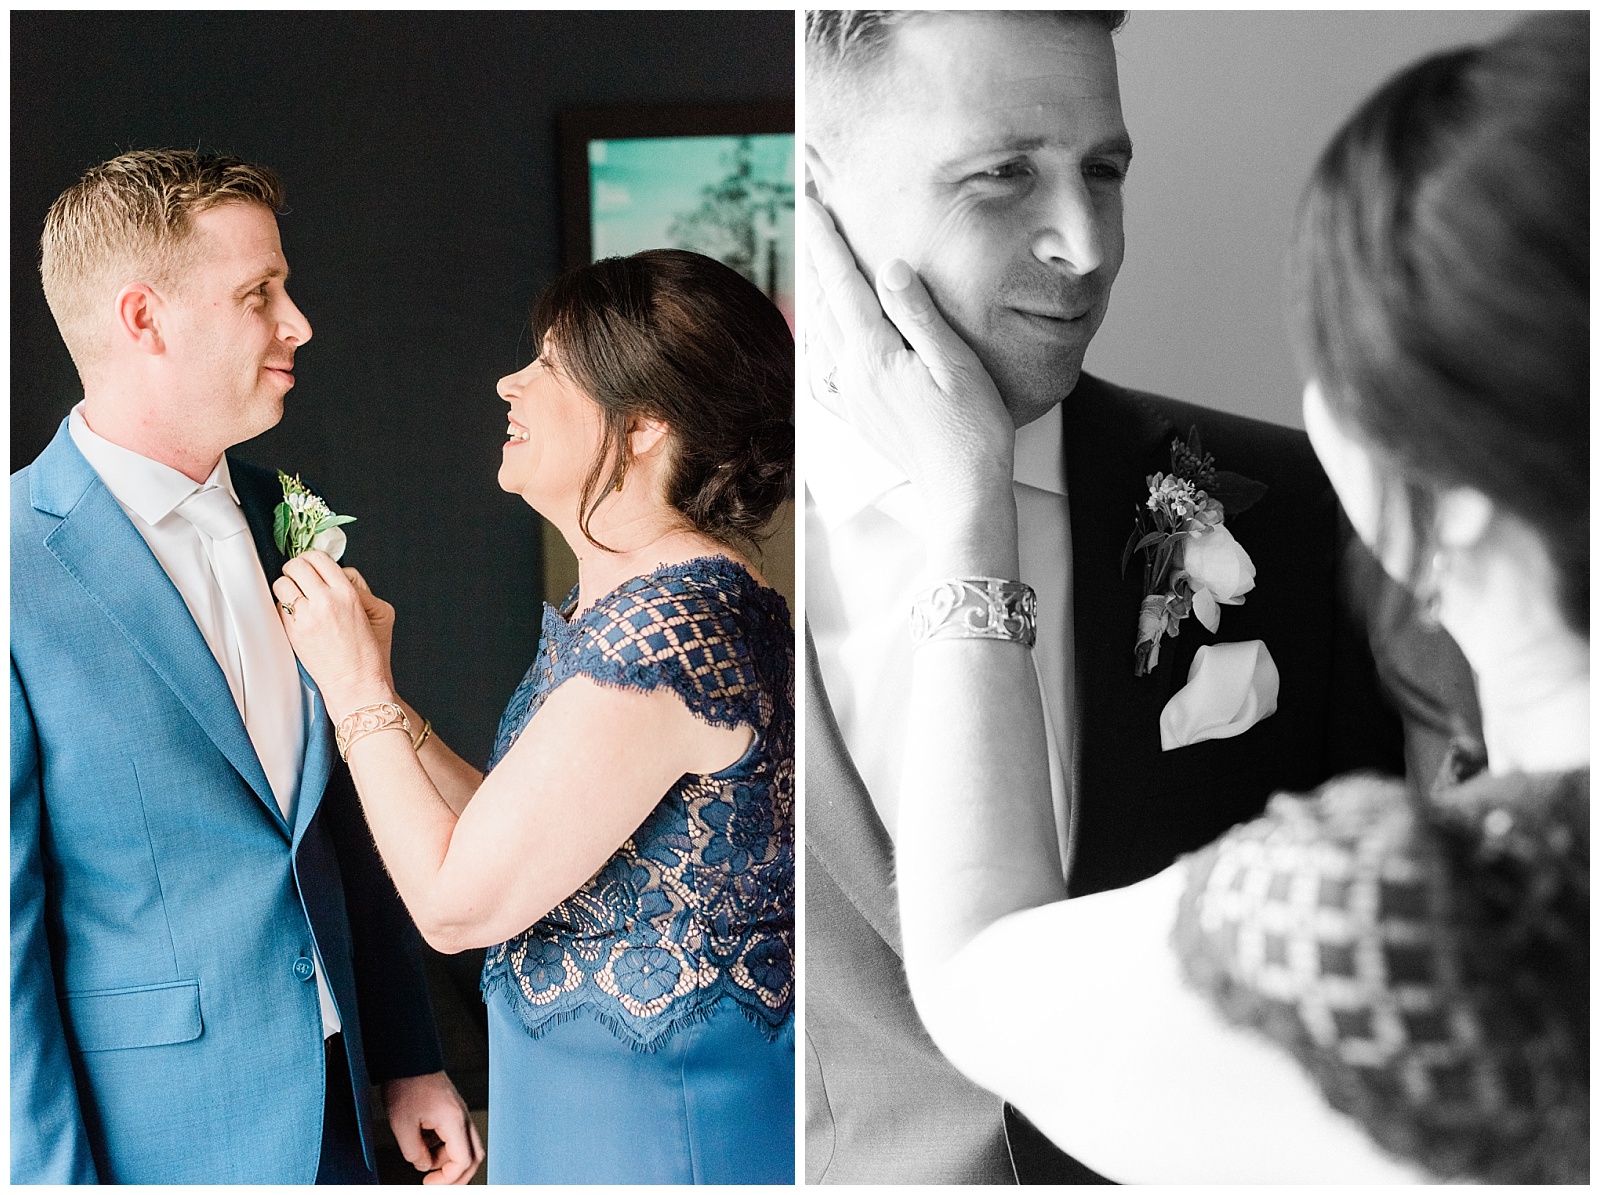 Groom's mother pins his boutonniere on his jacket.